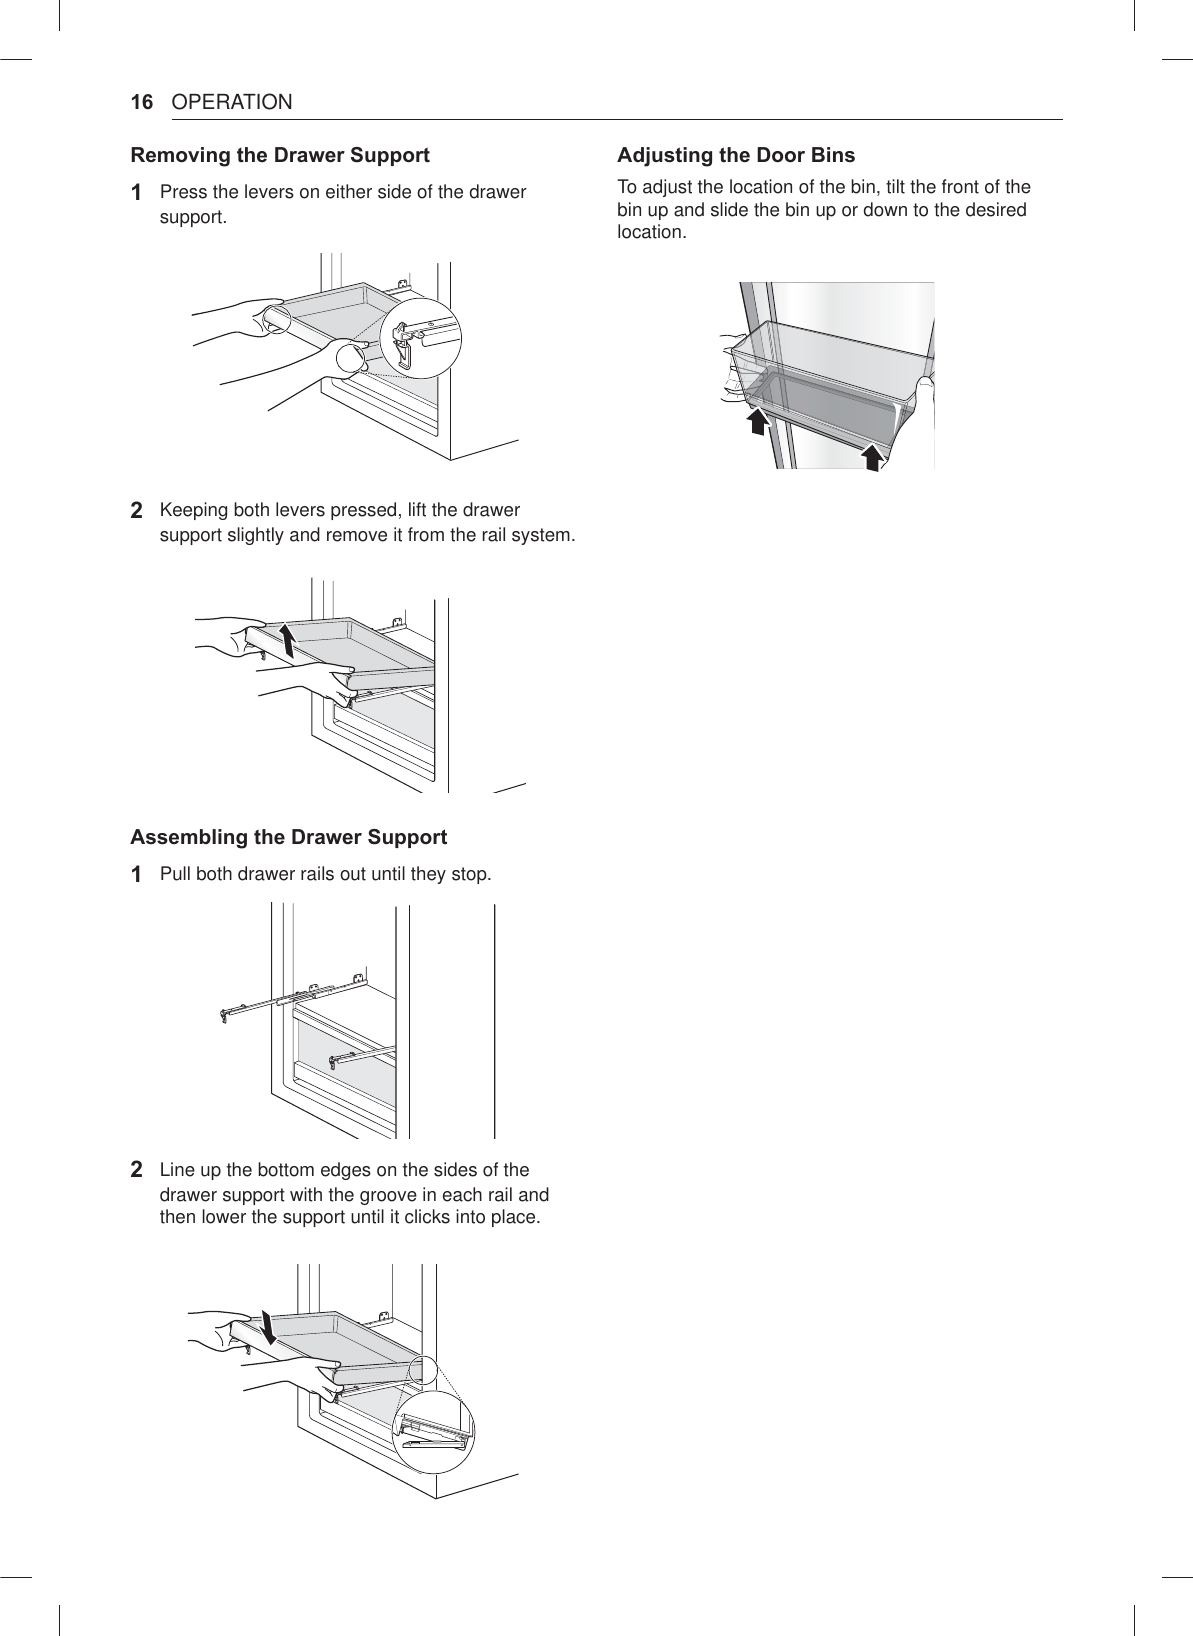 16 OPERATIONRemovinJ the Drawer Support1  Press the levers on either side of the drawer support.2 Keeping both levers pressed, lift the drawer support slightly and remove it from the rail system.AssemElinJ the Drawer Support1  Pull both drawer rails out until they stop.2 Line up the bottom edges on the sides of the drawer support with the groove in each rail and then lower the support until it clicks into place.AdMustinJ the Door BinsTo adjust the location of the bin, tilt the front of the bin up and slide the bin up or down to the desired location.